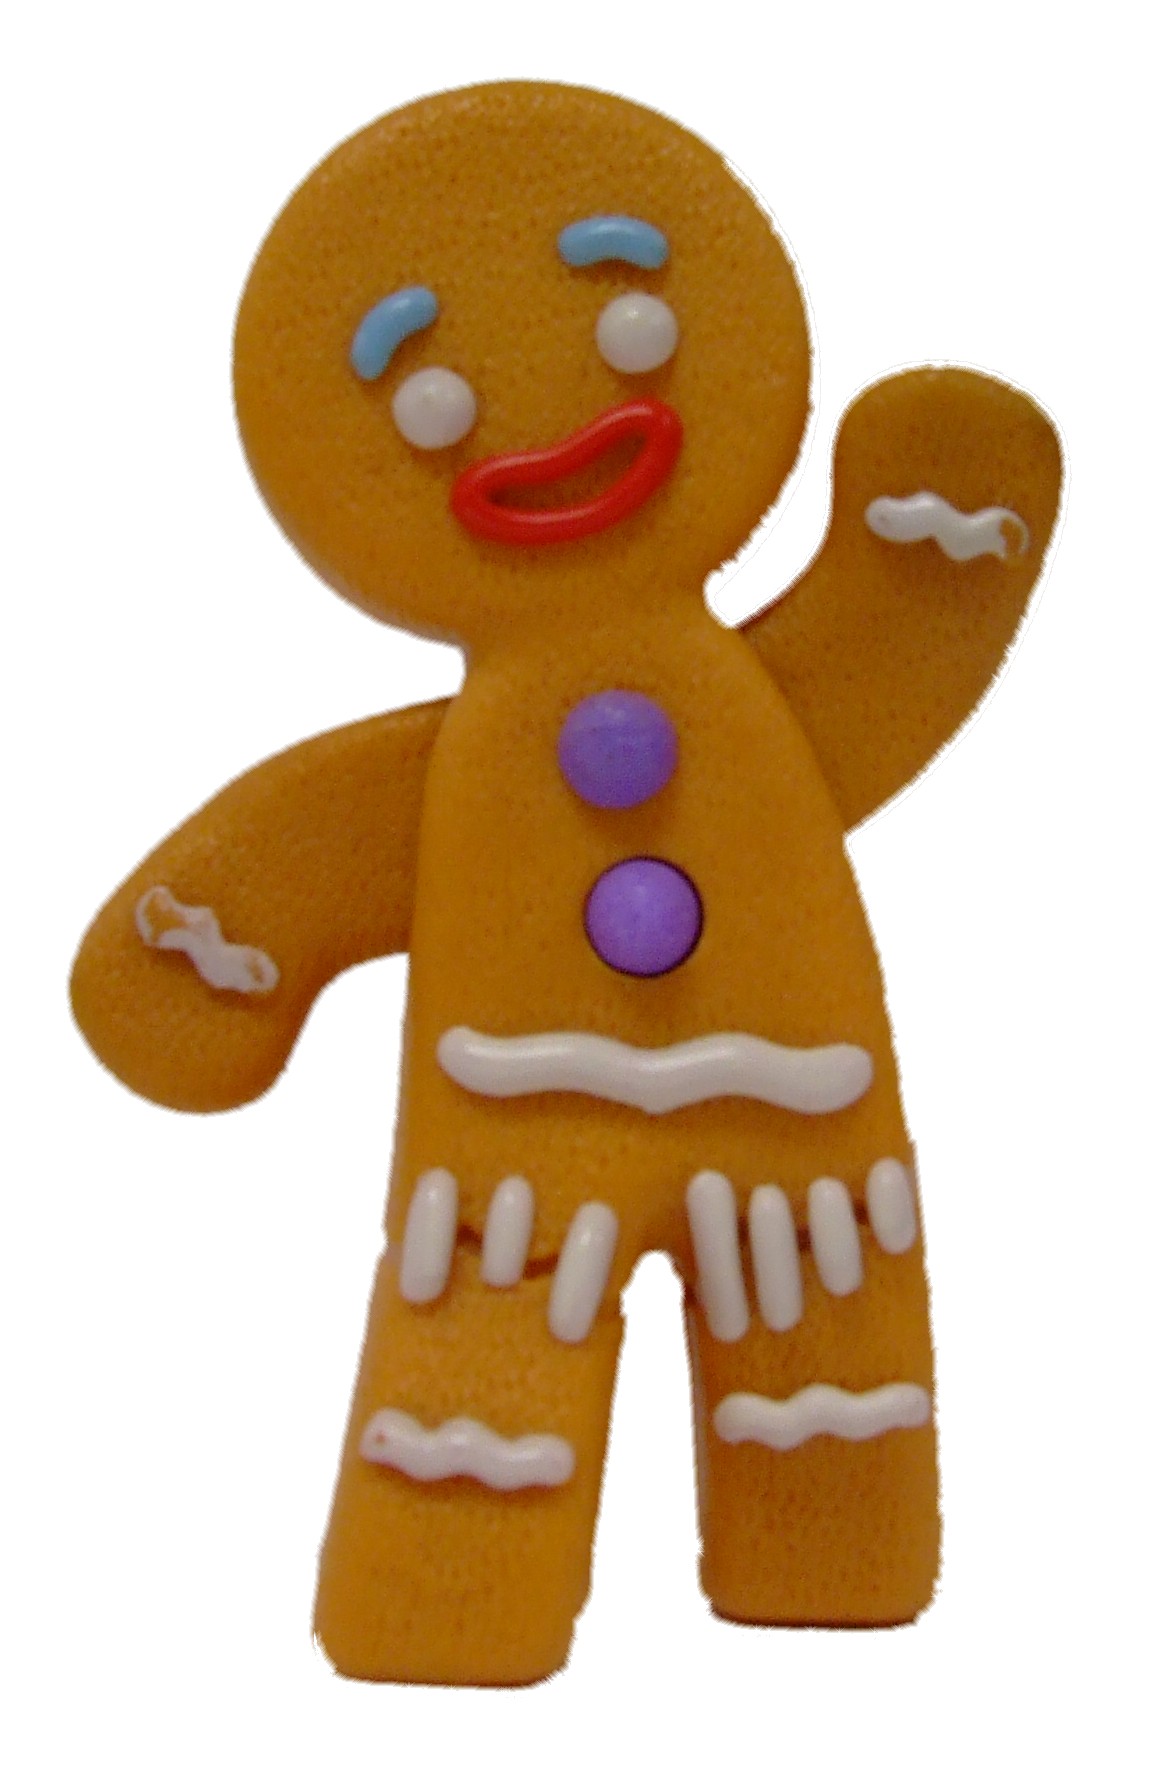 free clipart of a gingerbread man - photo #22